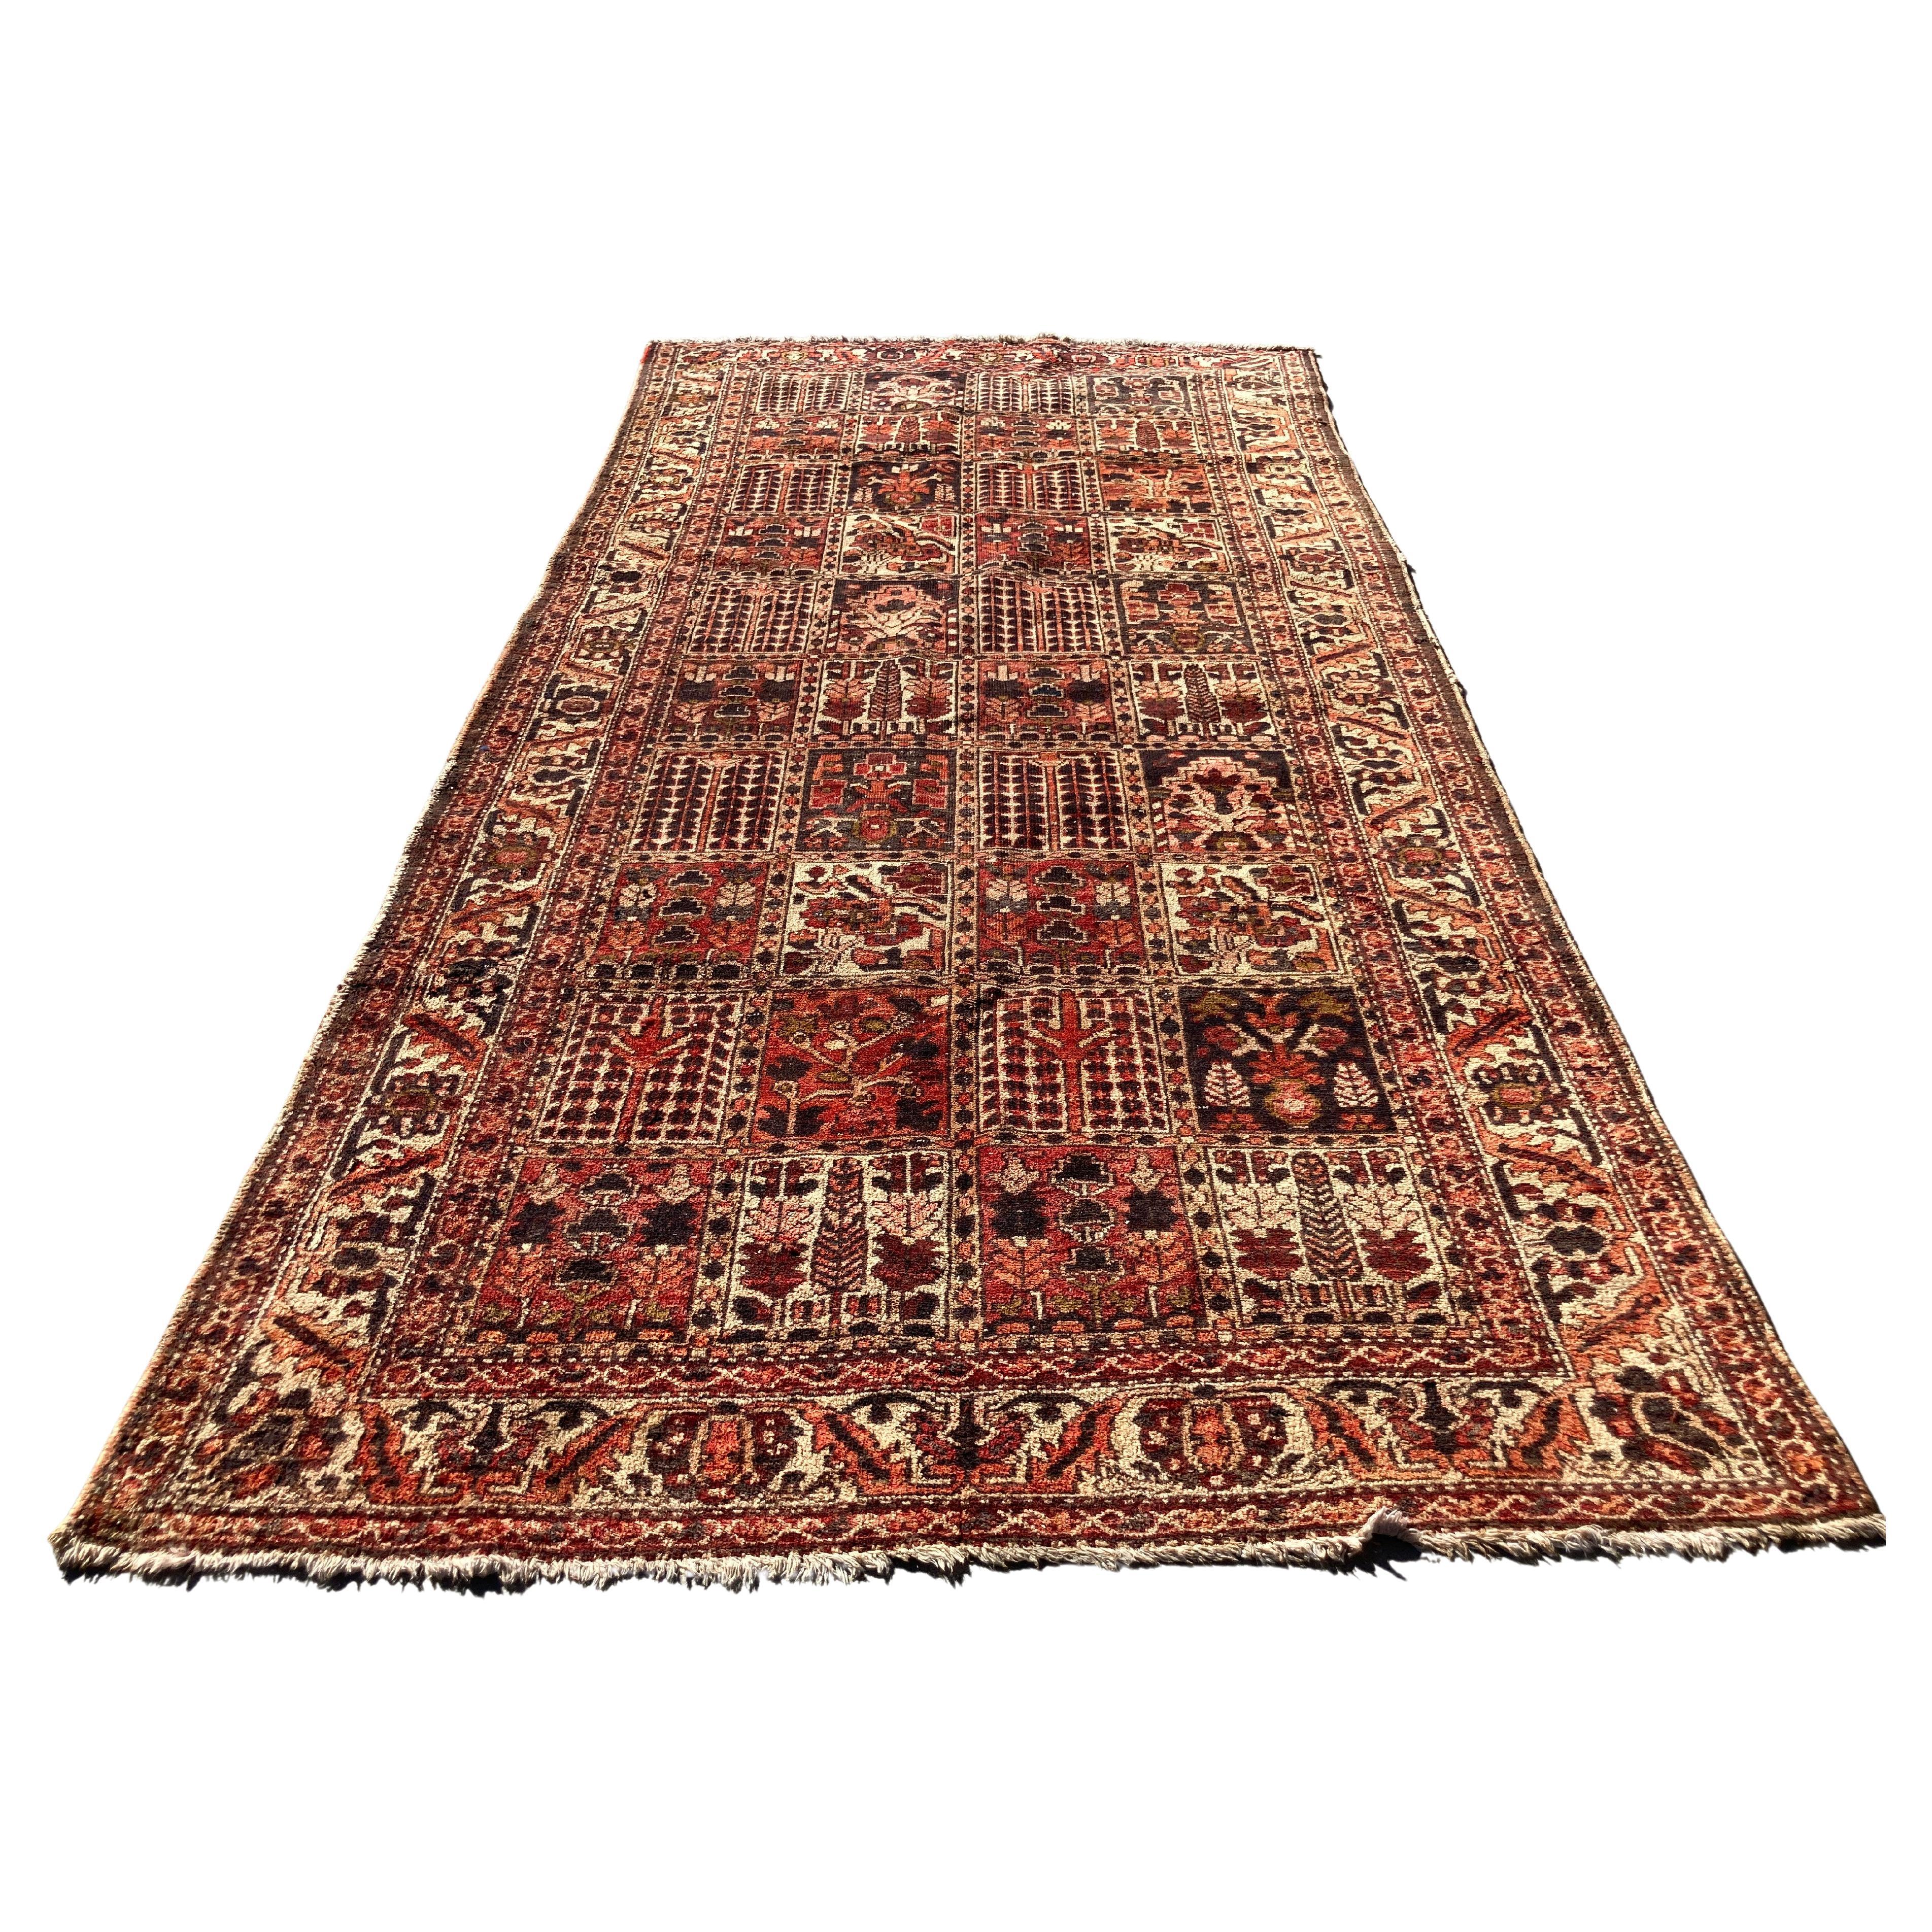 Antique Hand-Knotted Rug from Turkey